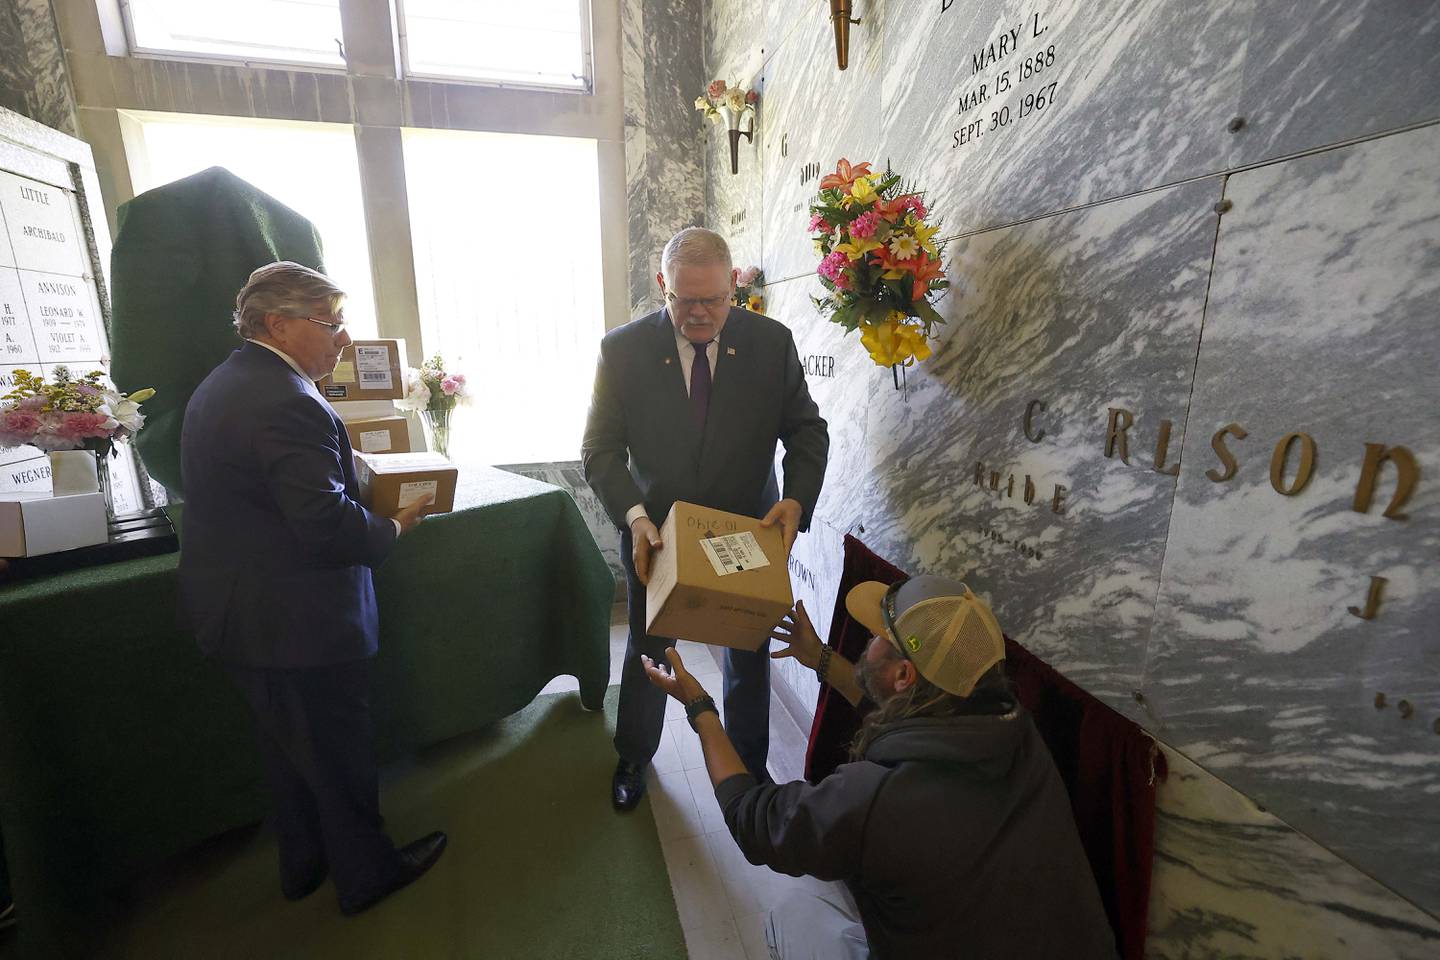 Funeral Director of Yurs Funeral Homes Timothy Bergman, left, and Kane County Coroner Rob Russell, center, take turns handing boxes of cremains to St. Charles Township North Cemetery Superintendent Brooks Ronzheimer who then places them in a crypt during a ceremony for the entombment of unclaimed bodies Thursday May 30, 2024 in St. Charles.